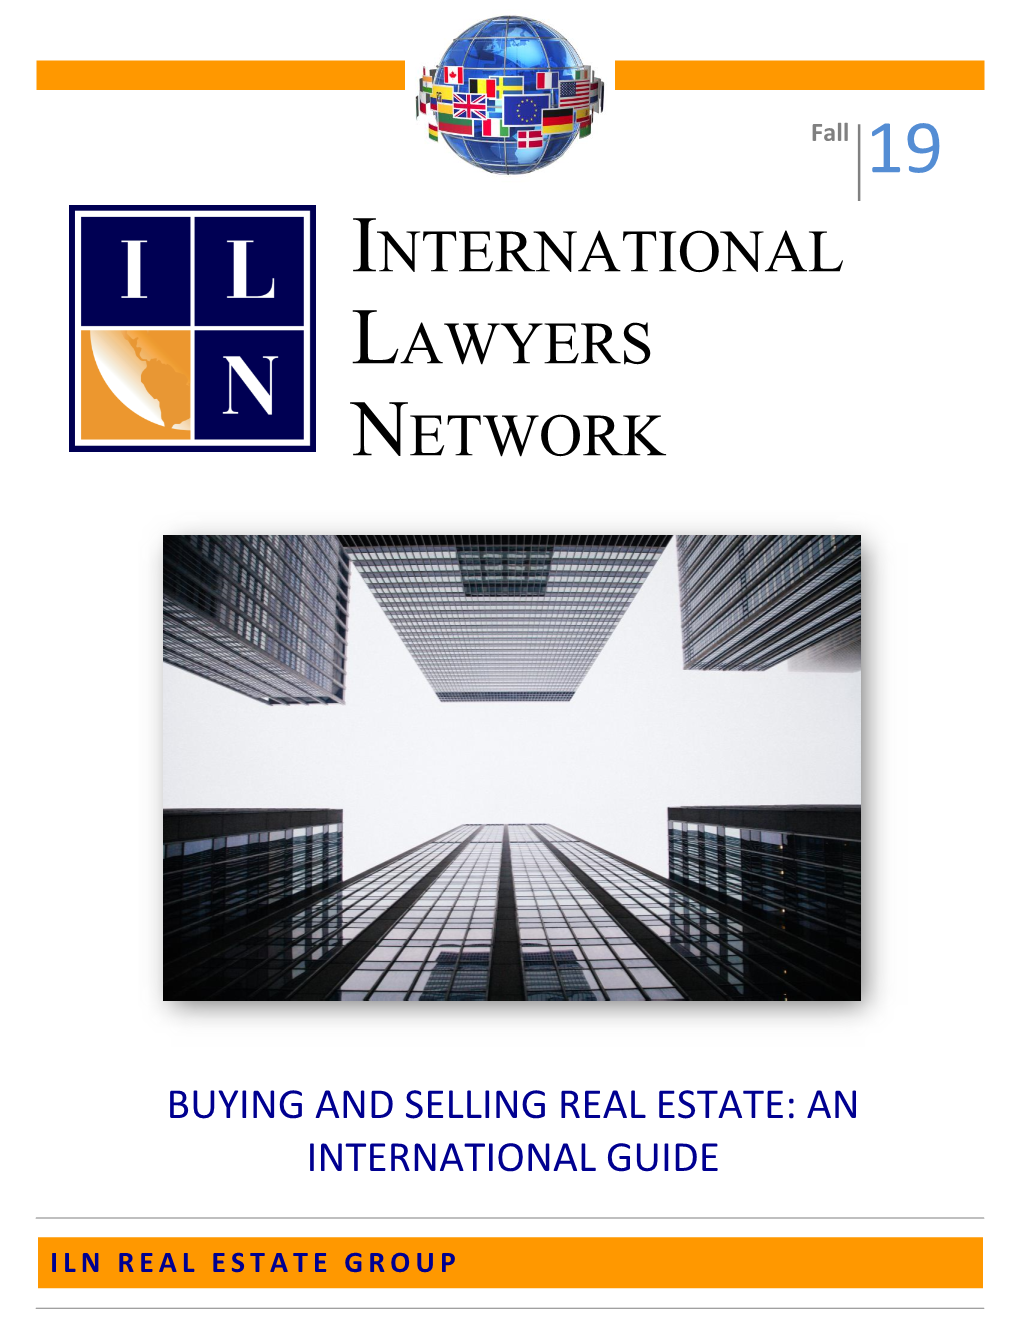 Buying and Selling Real Estate: an International Guide